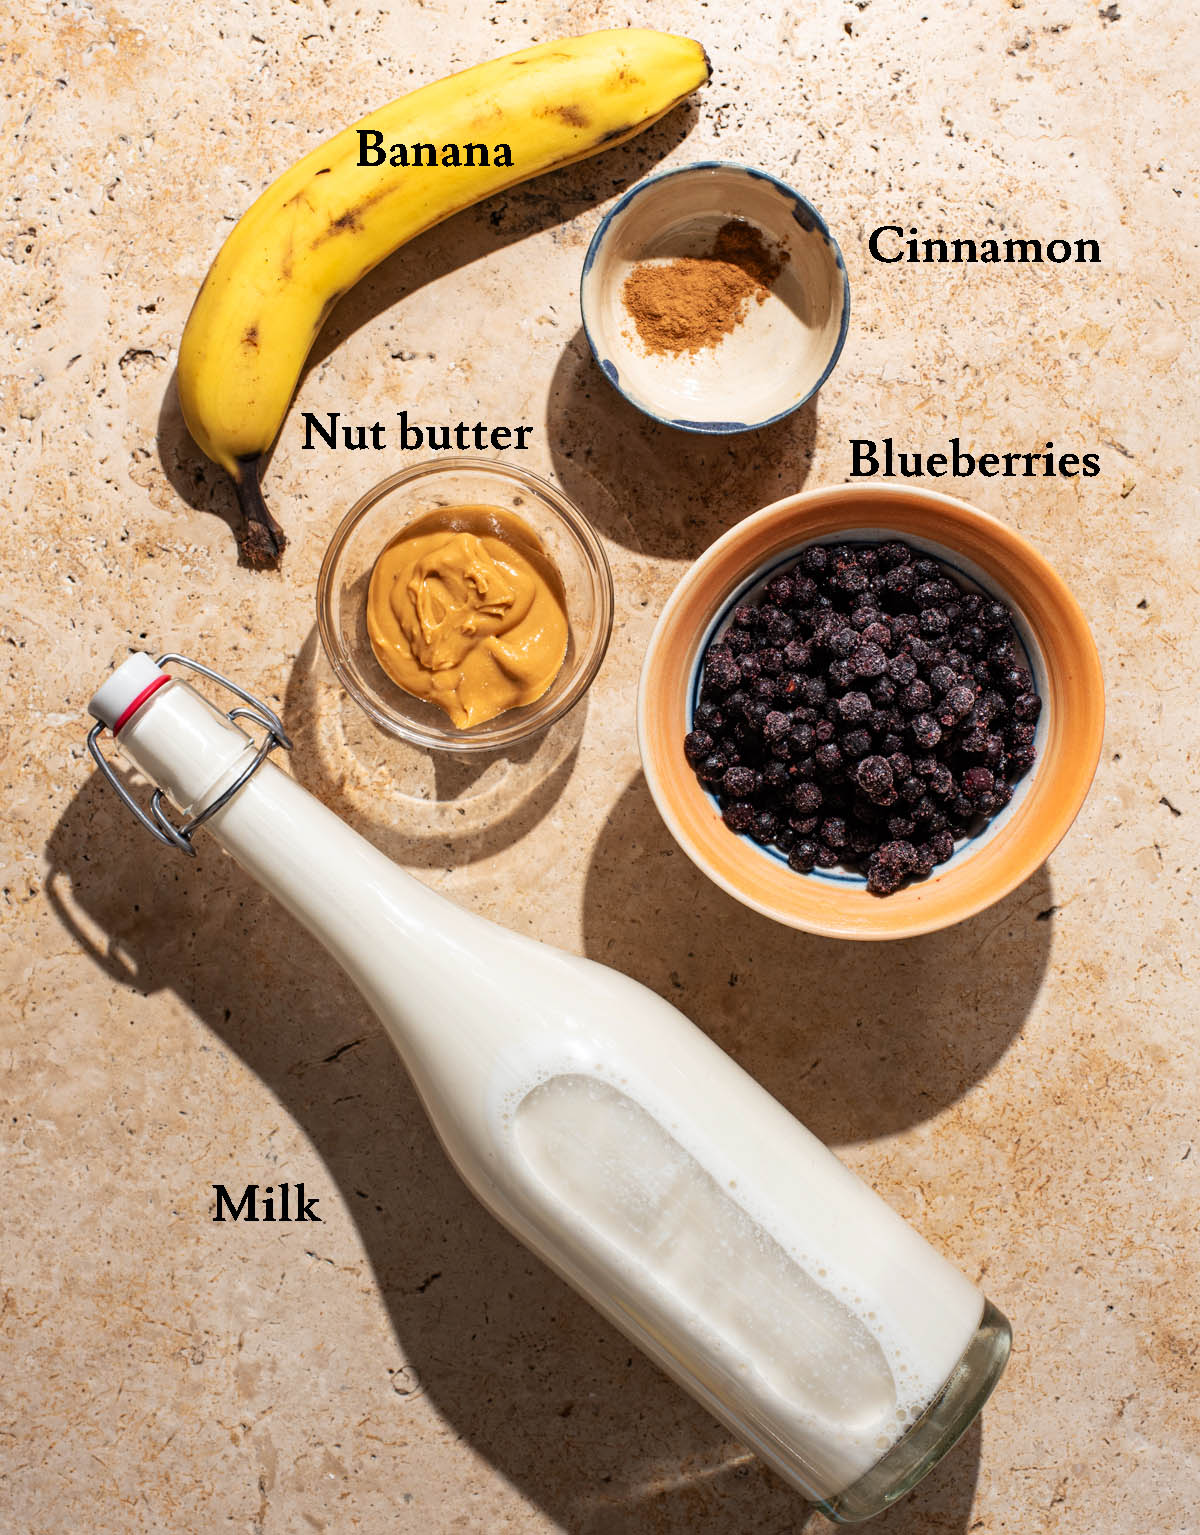 Blueberry smoothie ingredients with labels.